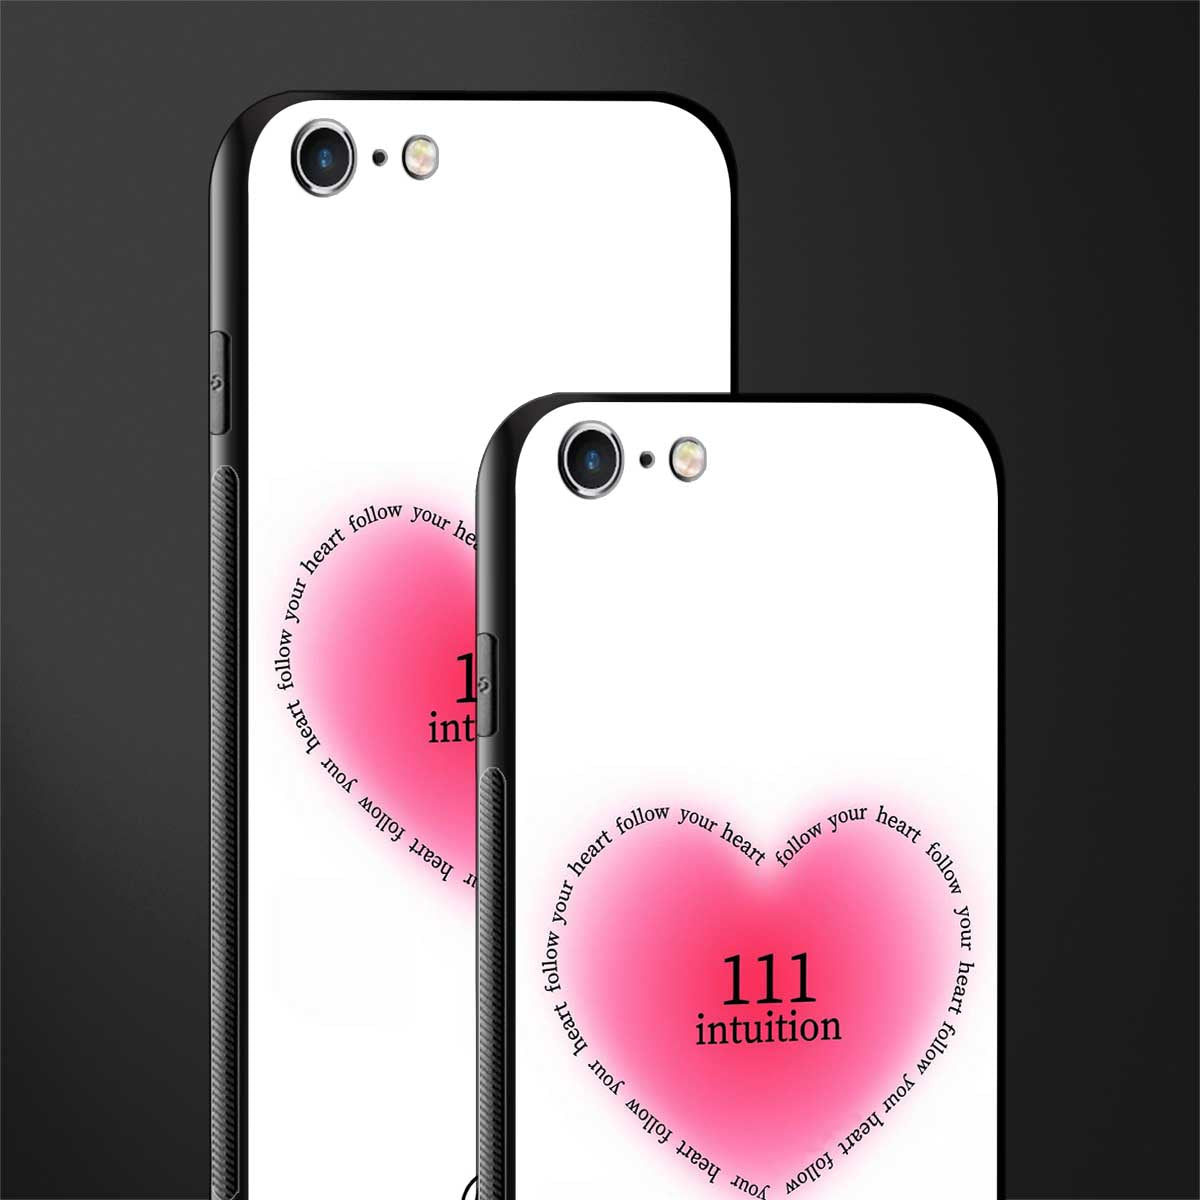 111 intuition glass case for iphone 6 image-2